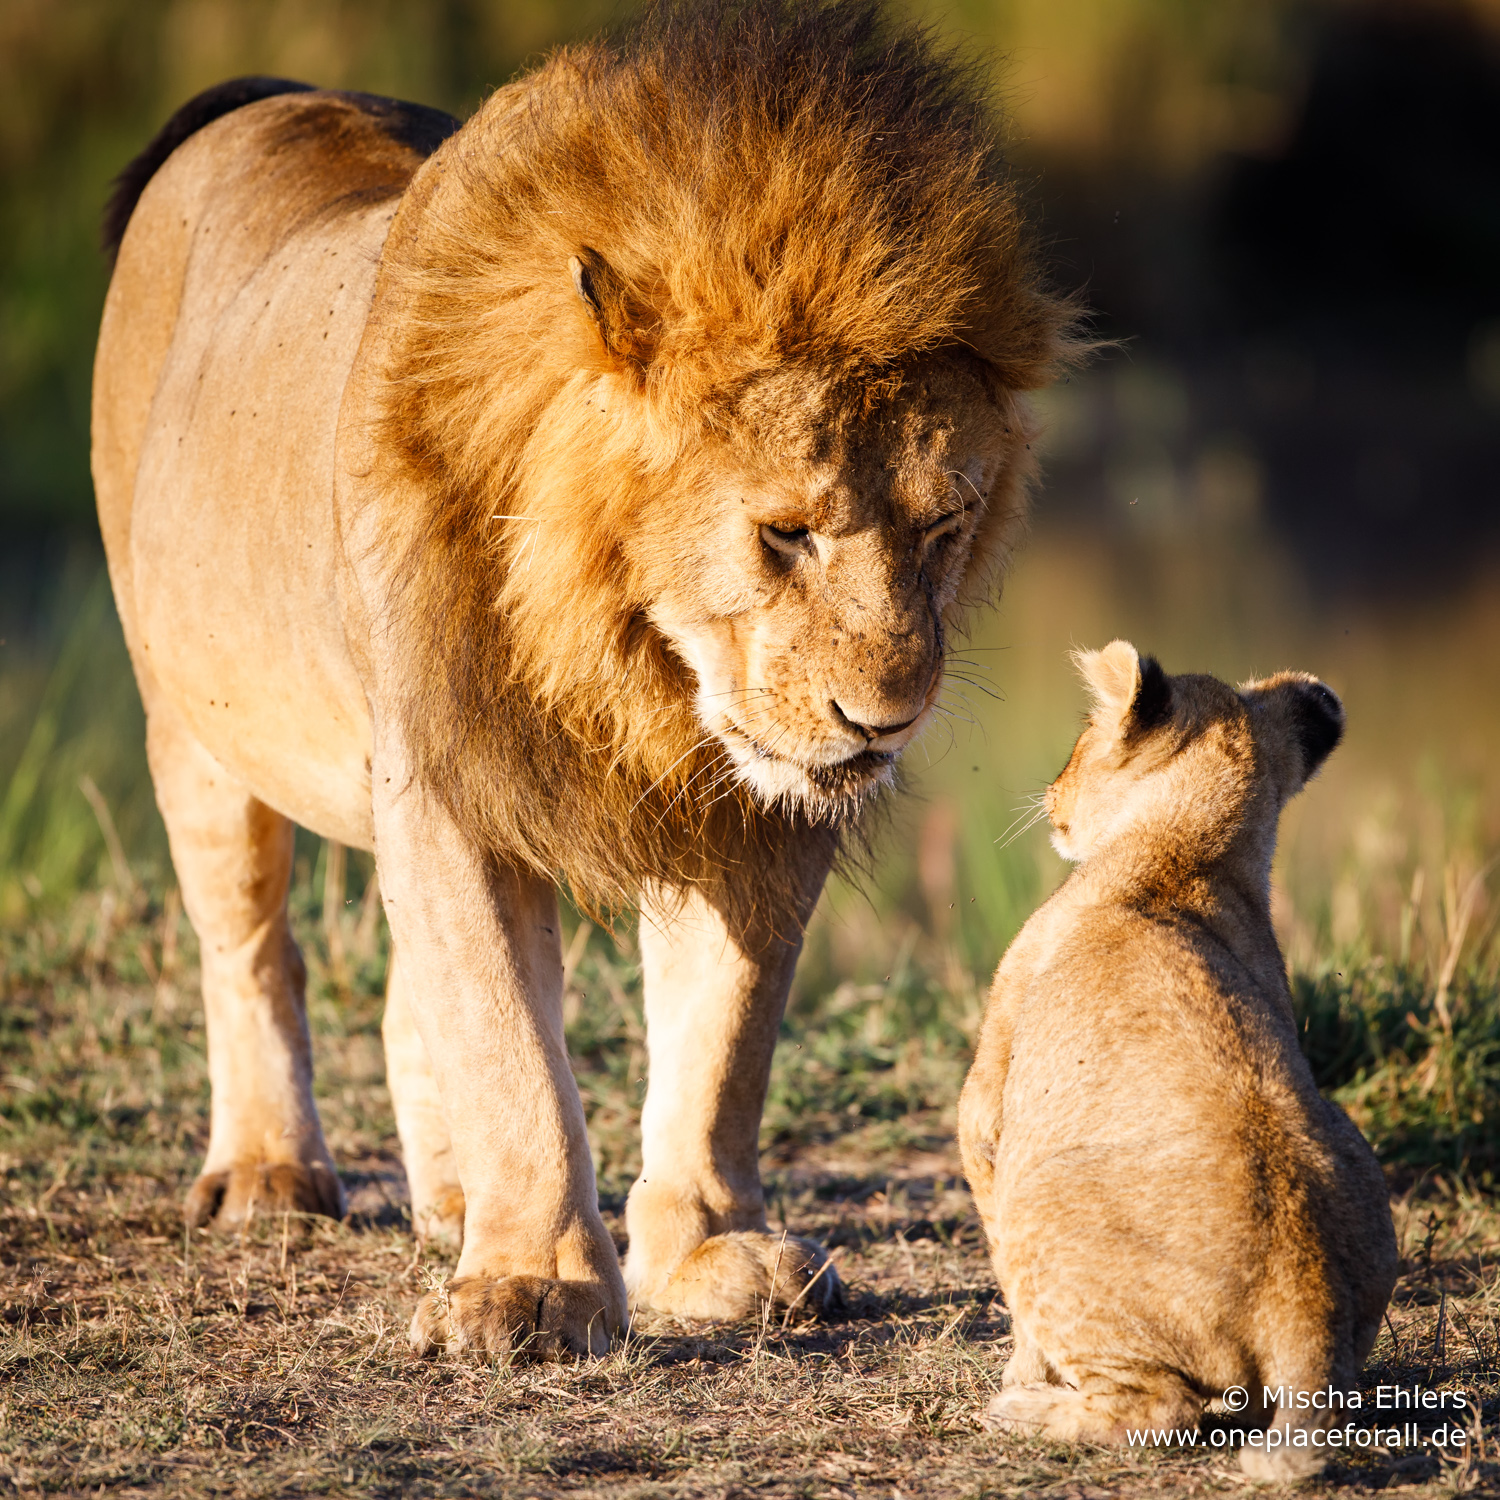 http://www.c4photosafaris.com/uploader/images/Male_Lion_and_Cub.jpg